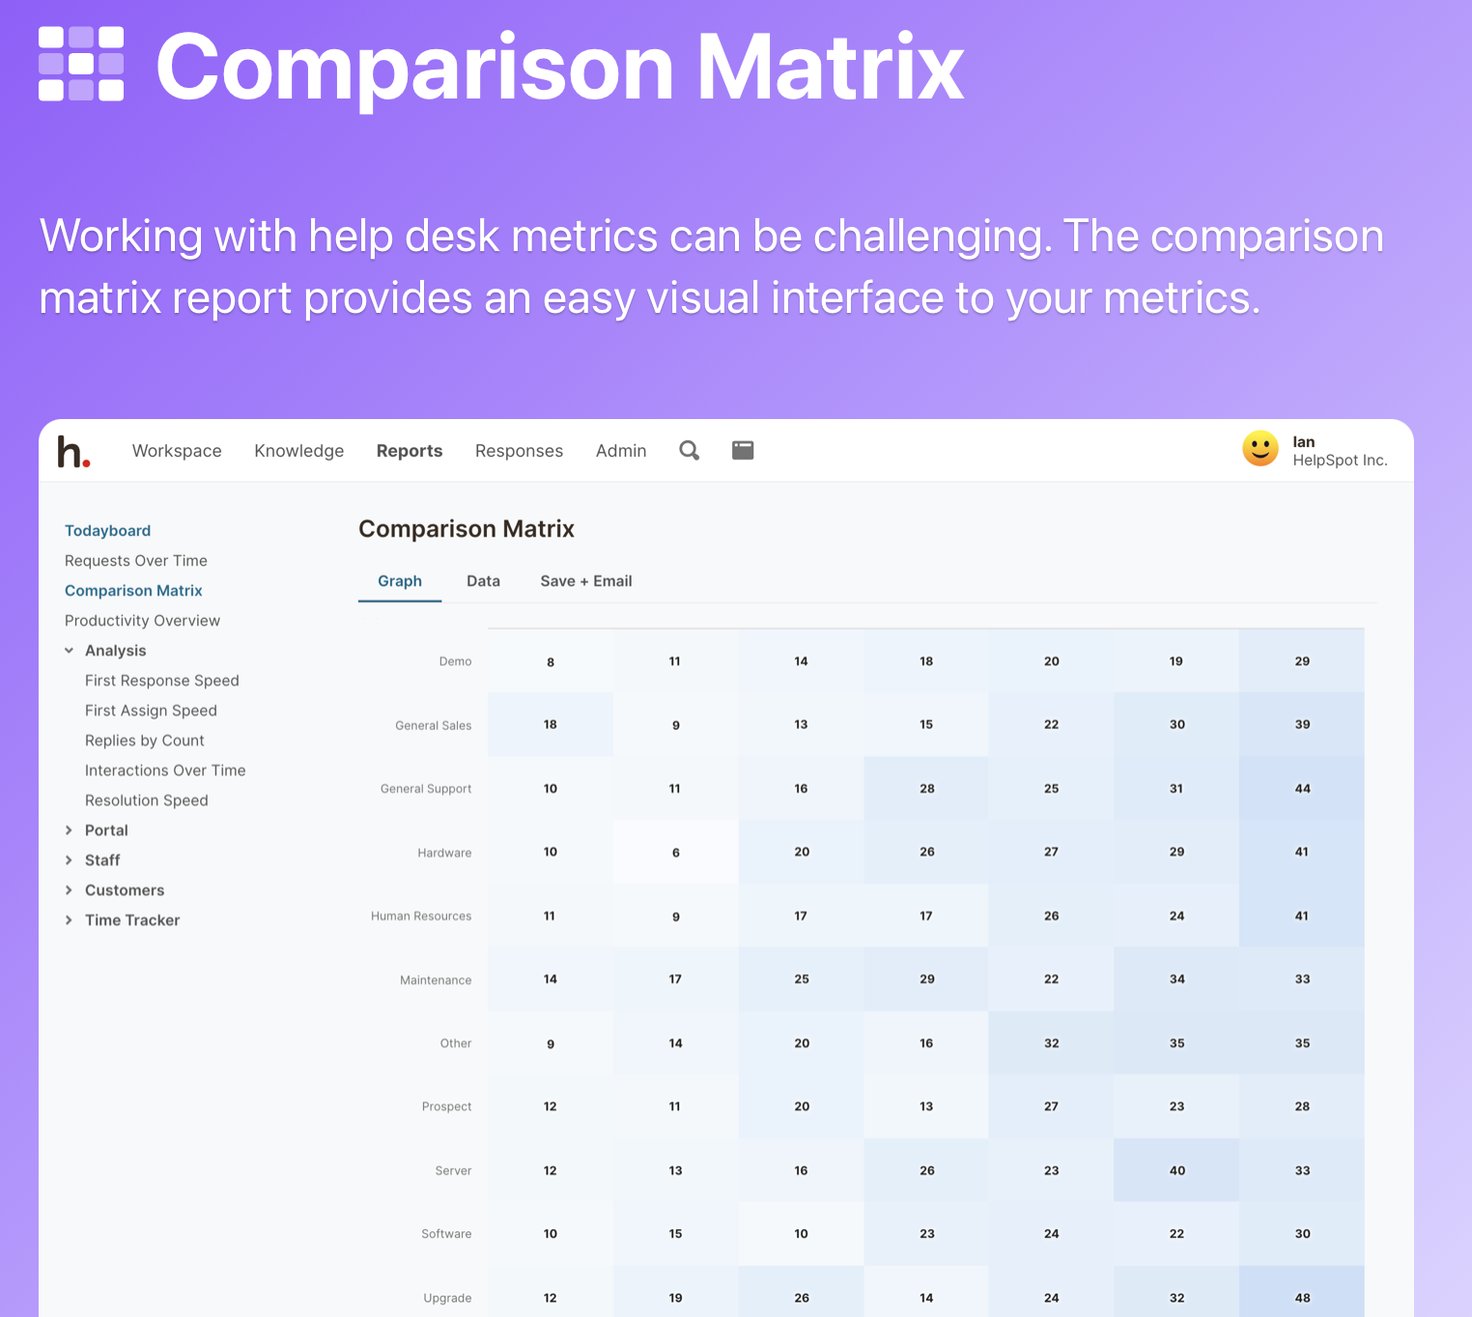 HelpSpot's Comparison Matrix provides an easy visual interface to your metrics.